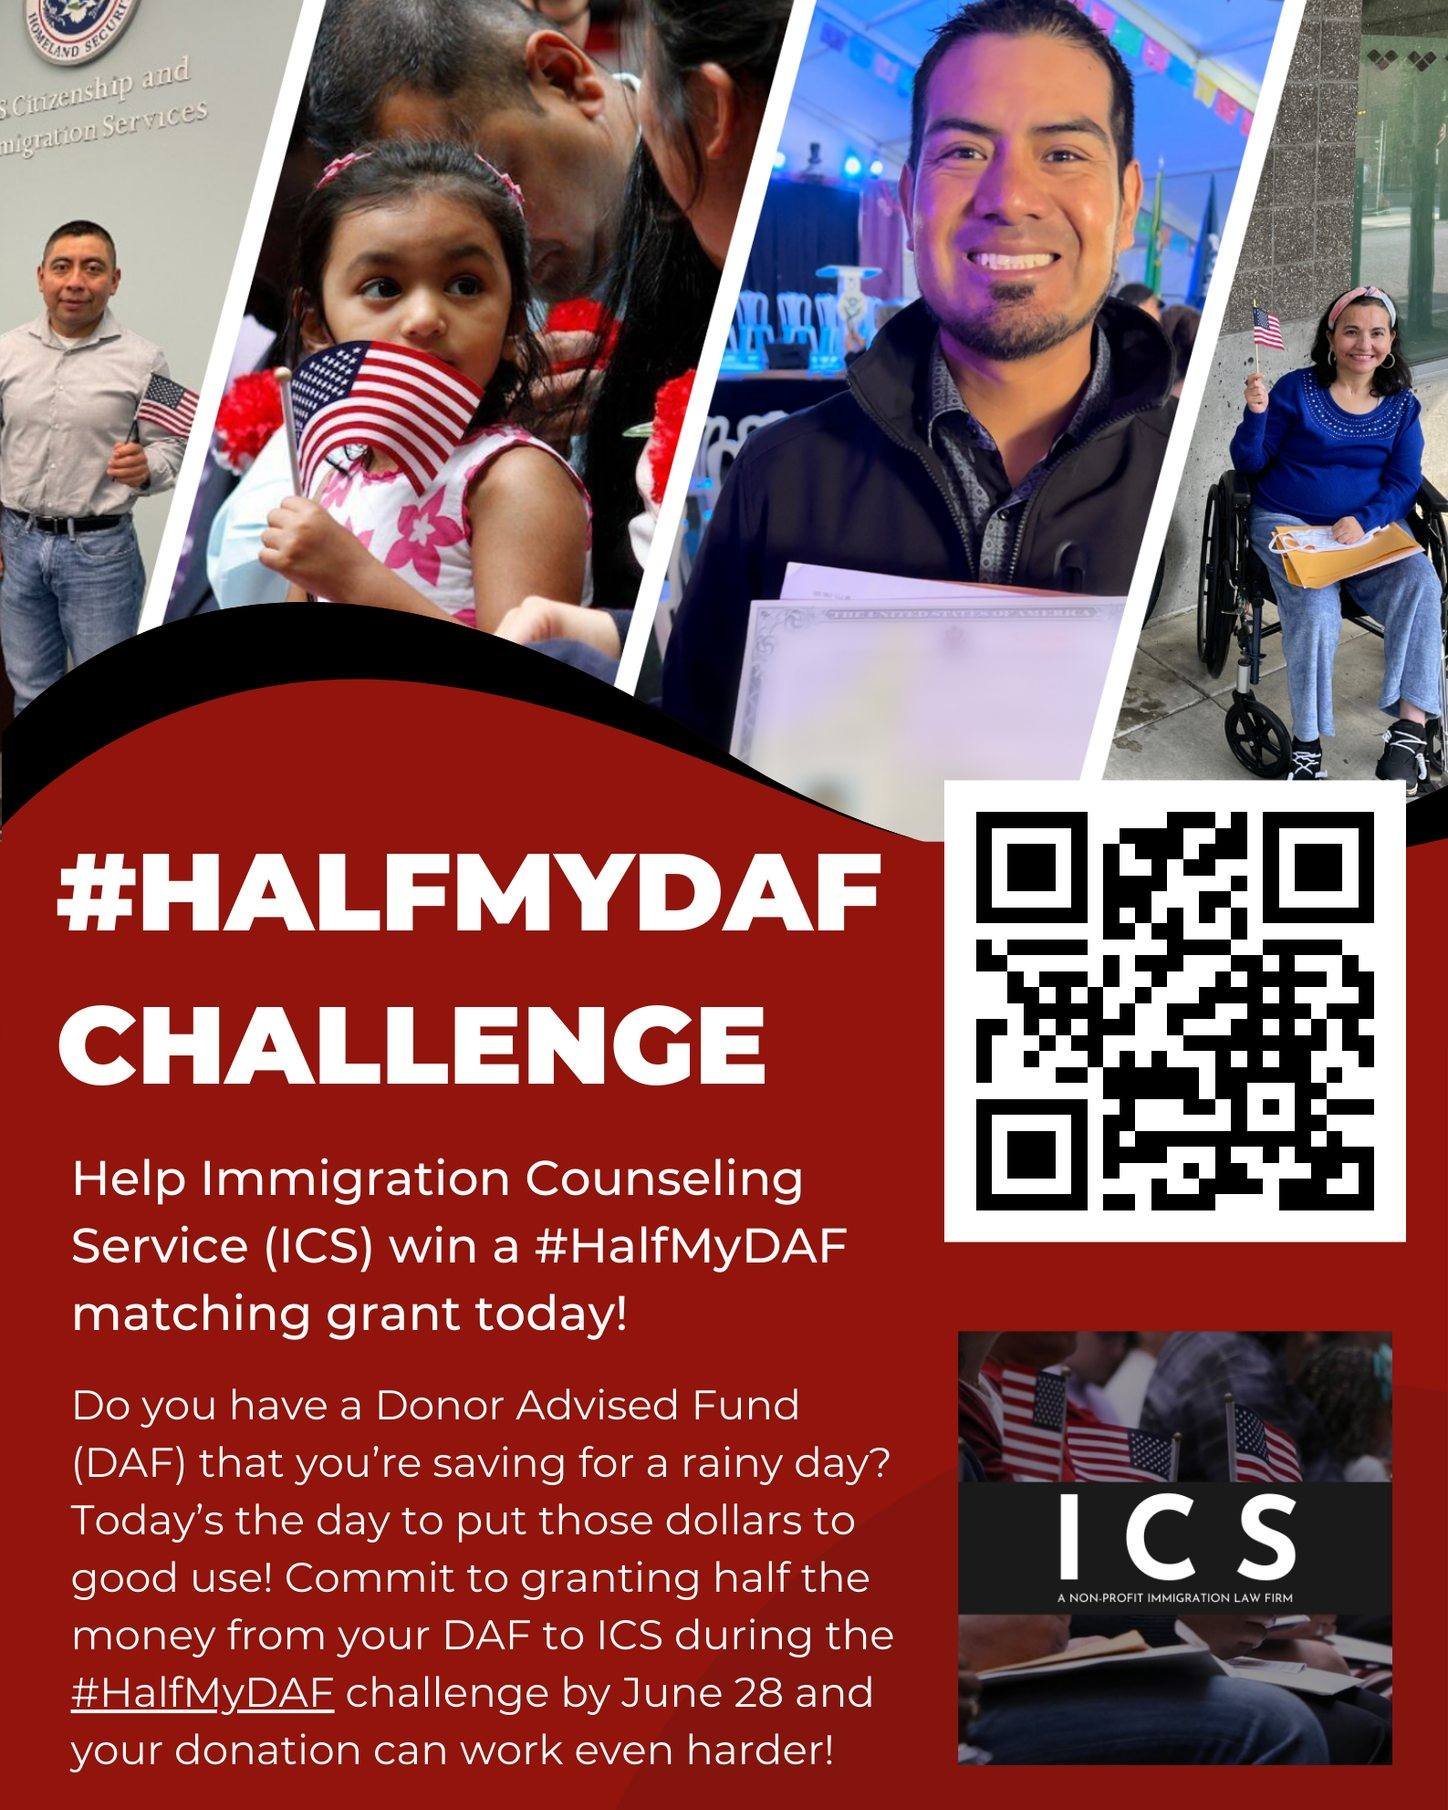 Do you have a Donor Advised Fund (DAF) that you&rsquo;re saving for a rainy day? ☔ Today&rsquo;s the day to put those dollars to good use! Commit to granting half the money from your DAF to ICS during the #HalfMyDAF challenge by June 28 and your dona